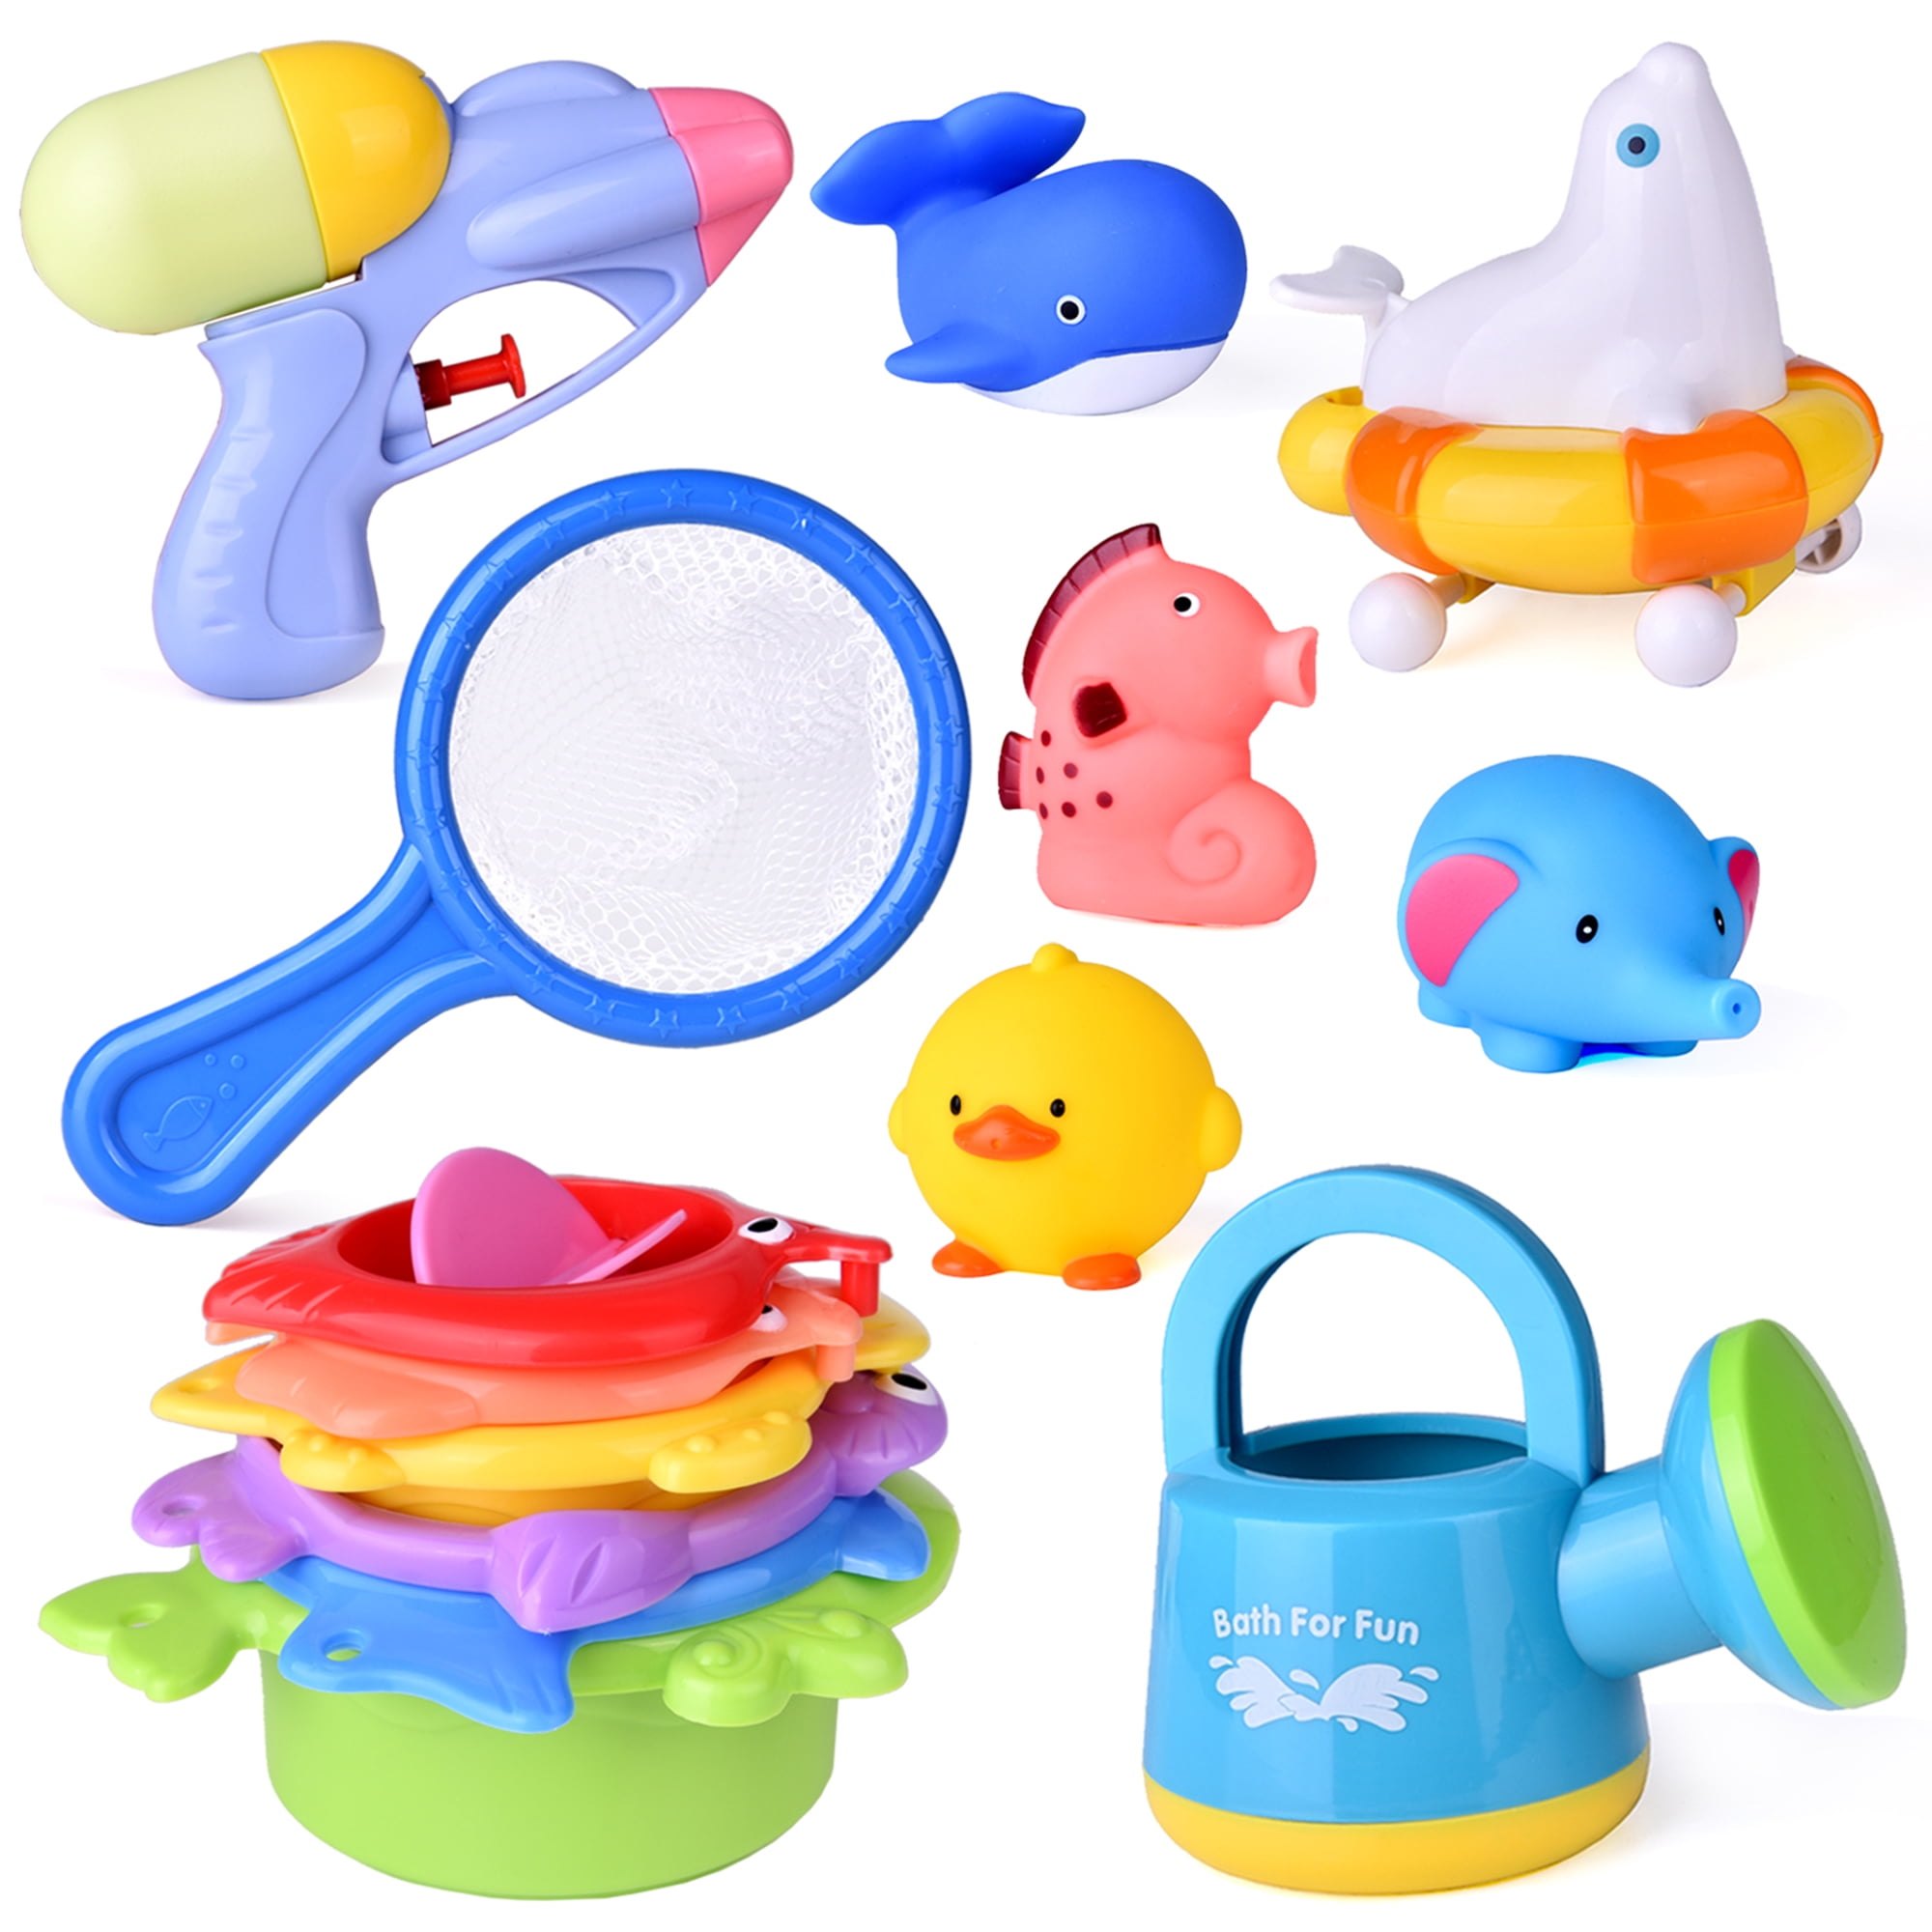 Bluebird Ocean Park Baby Bath Toys for Toddlers Ages 1-4, Bathtub Swimming  Pool Game Toy with Floating Board， Large Size Enhanced Children's Fun,  Great Gift For Kids price in Saudi Arabia